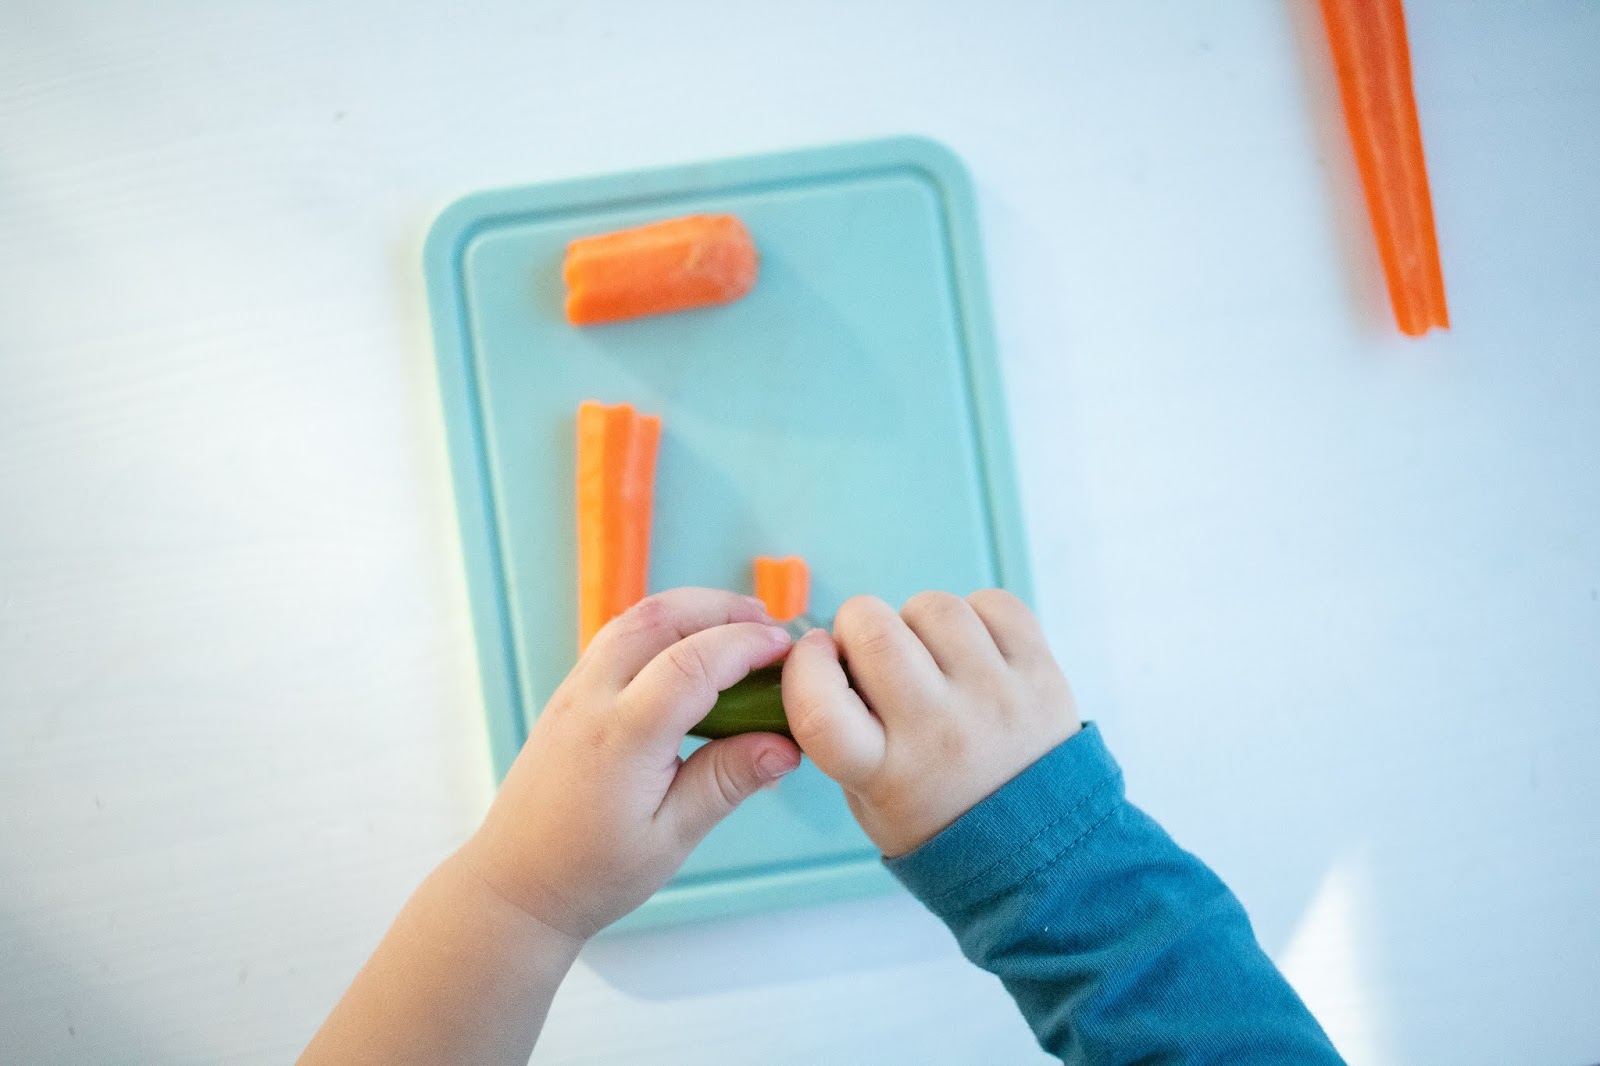 Here are some tips and tricks for introducing a wavy chopper knife to your toddler. This easy Montessori practical life tool can help encourage independence in the kitchen.